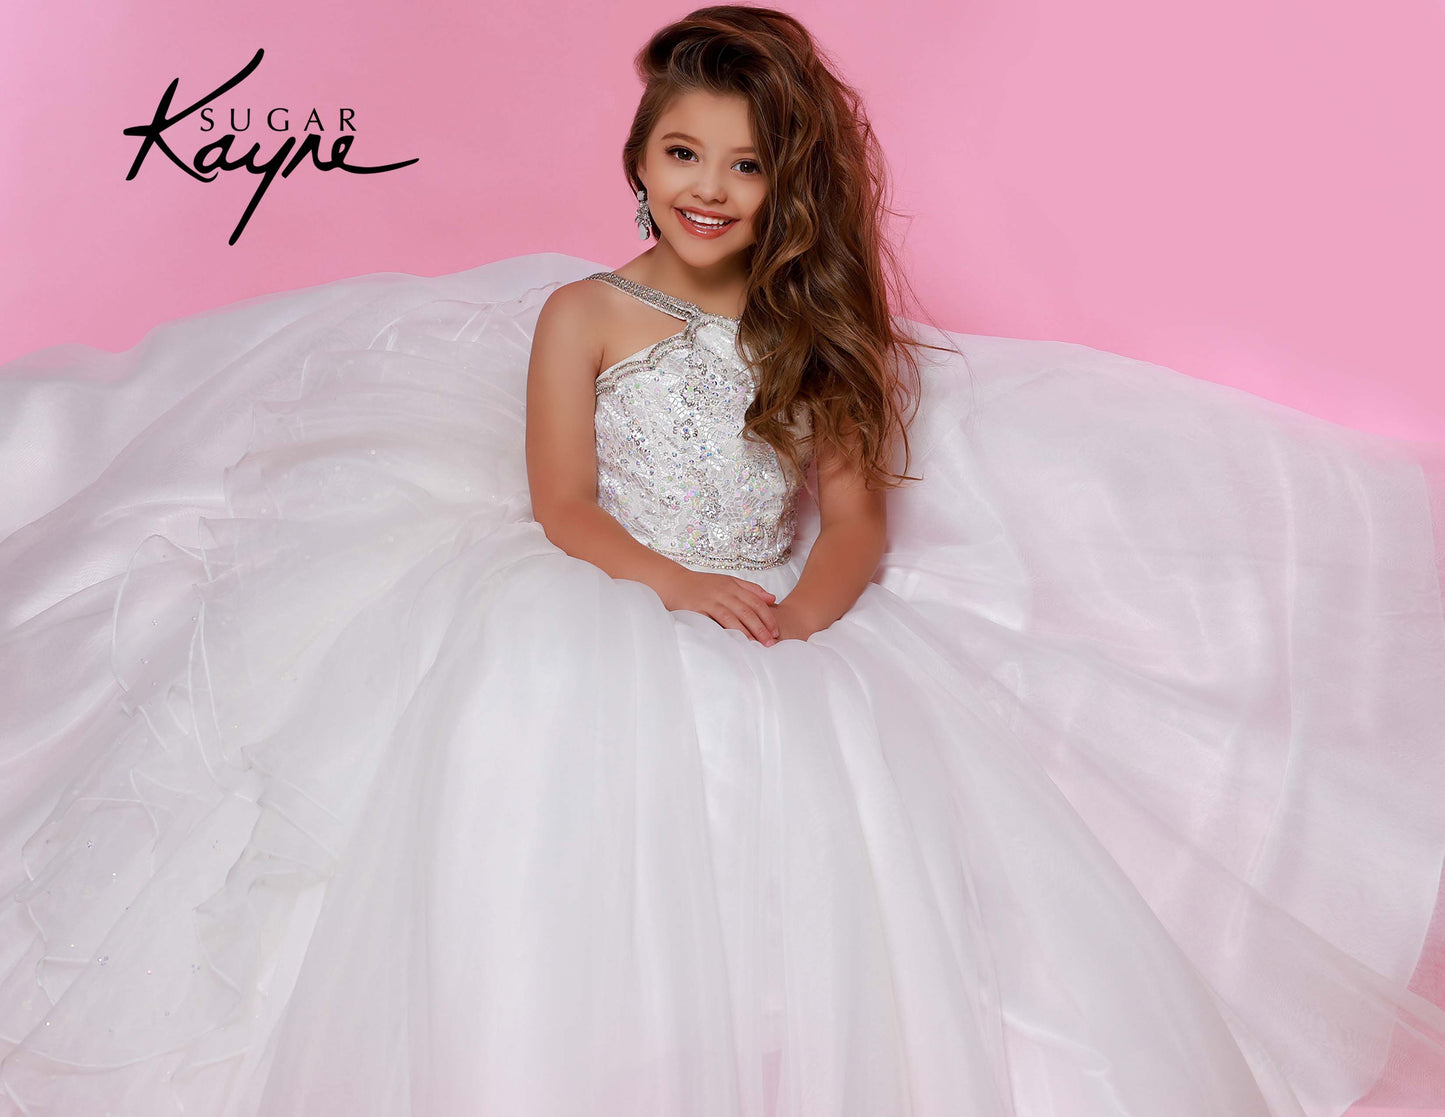 Sugar Kayne C143 Girls and Preteens Pageant Dress.  This is a beautiful flowy organza pageant gown with embellished high neckline.  This dress features an organza ruffle that flows down the back of the dress white